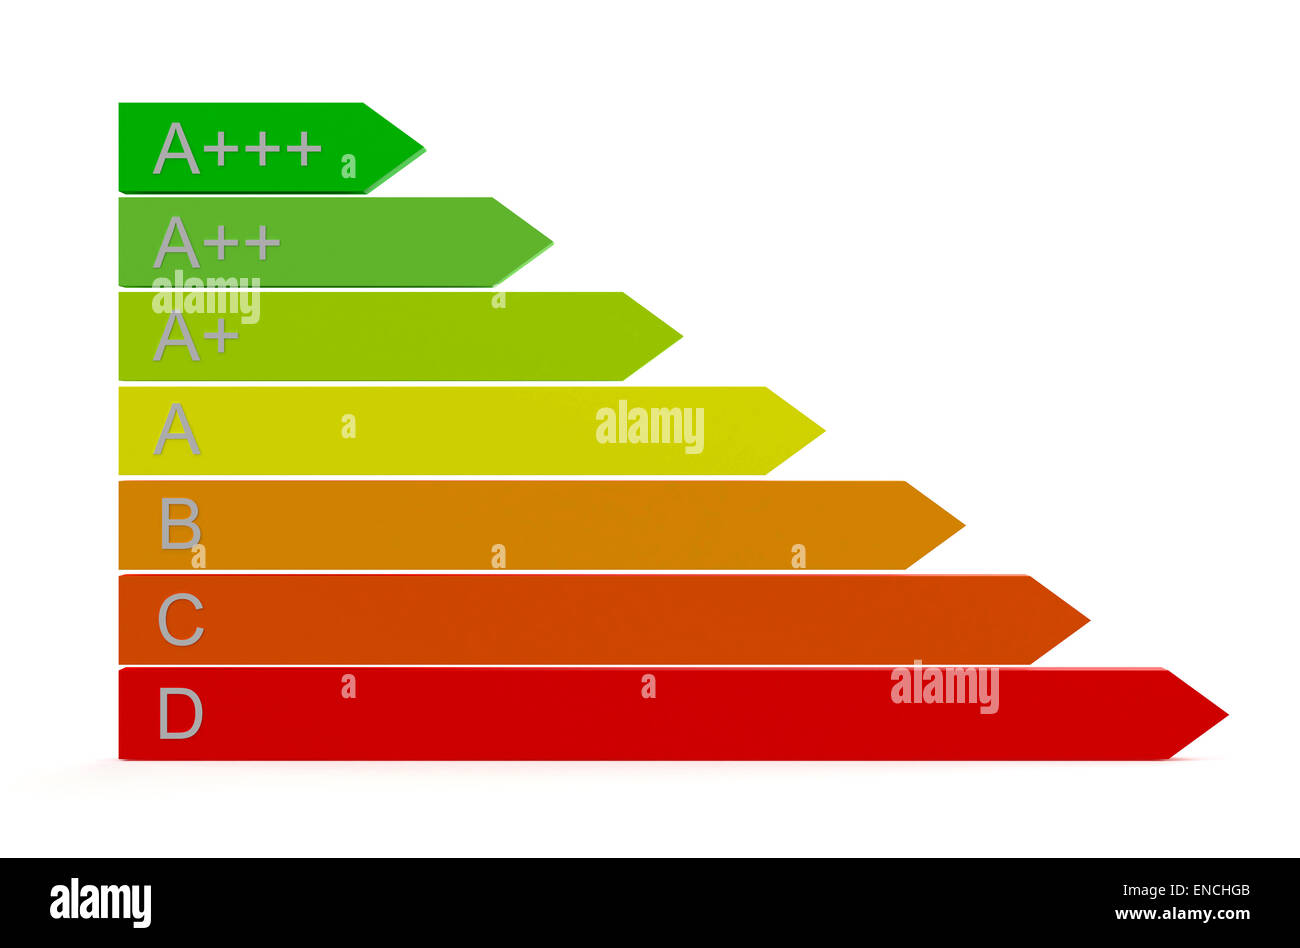 Energy efficiency rating scale isolated on white background Stock Photo